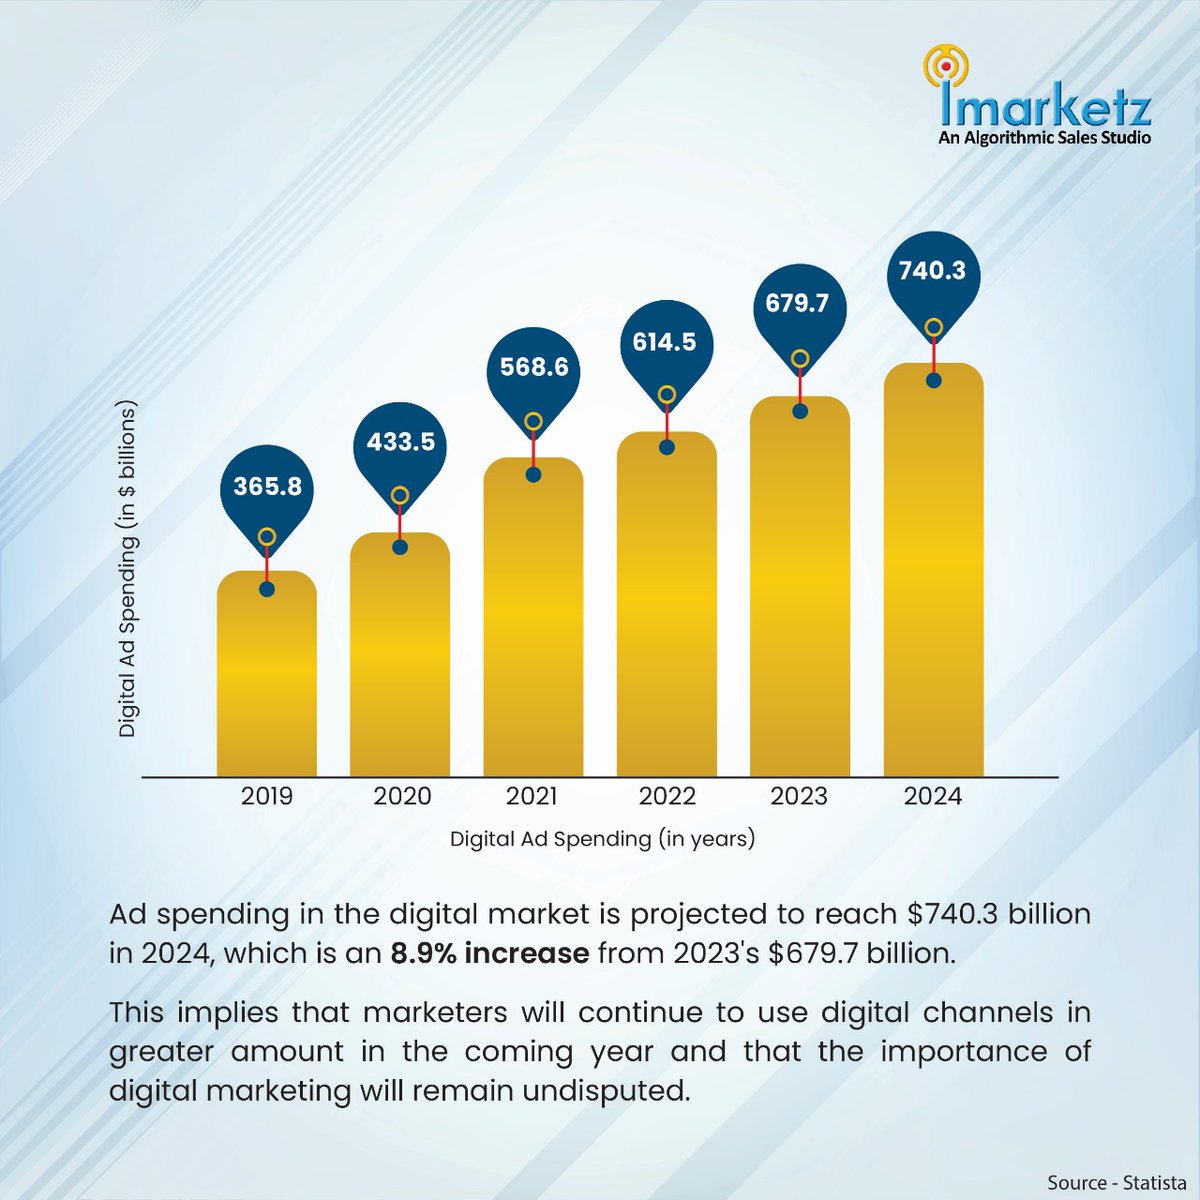 Unlock the potential of your brand in 2024!

With digital ad spending projected to surge by 8.9%, reaching $740.3 billion, it's clear that the future belongs to digital marketing.

#iMarketz #AdSpending #DigitalAdvertisingMarket #Marketing #Ads #DynamicGrowth #digitalmarketing